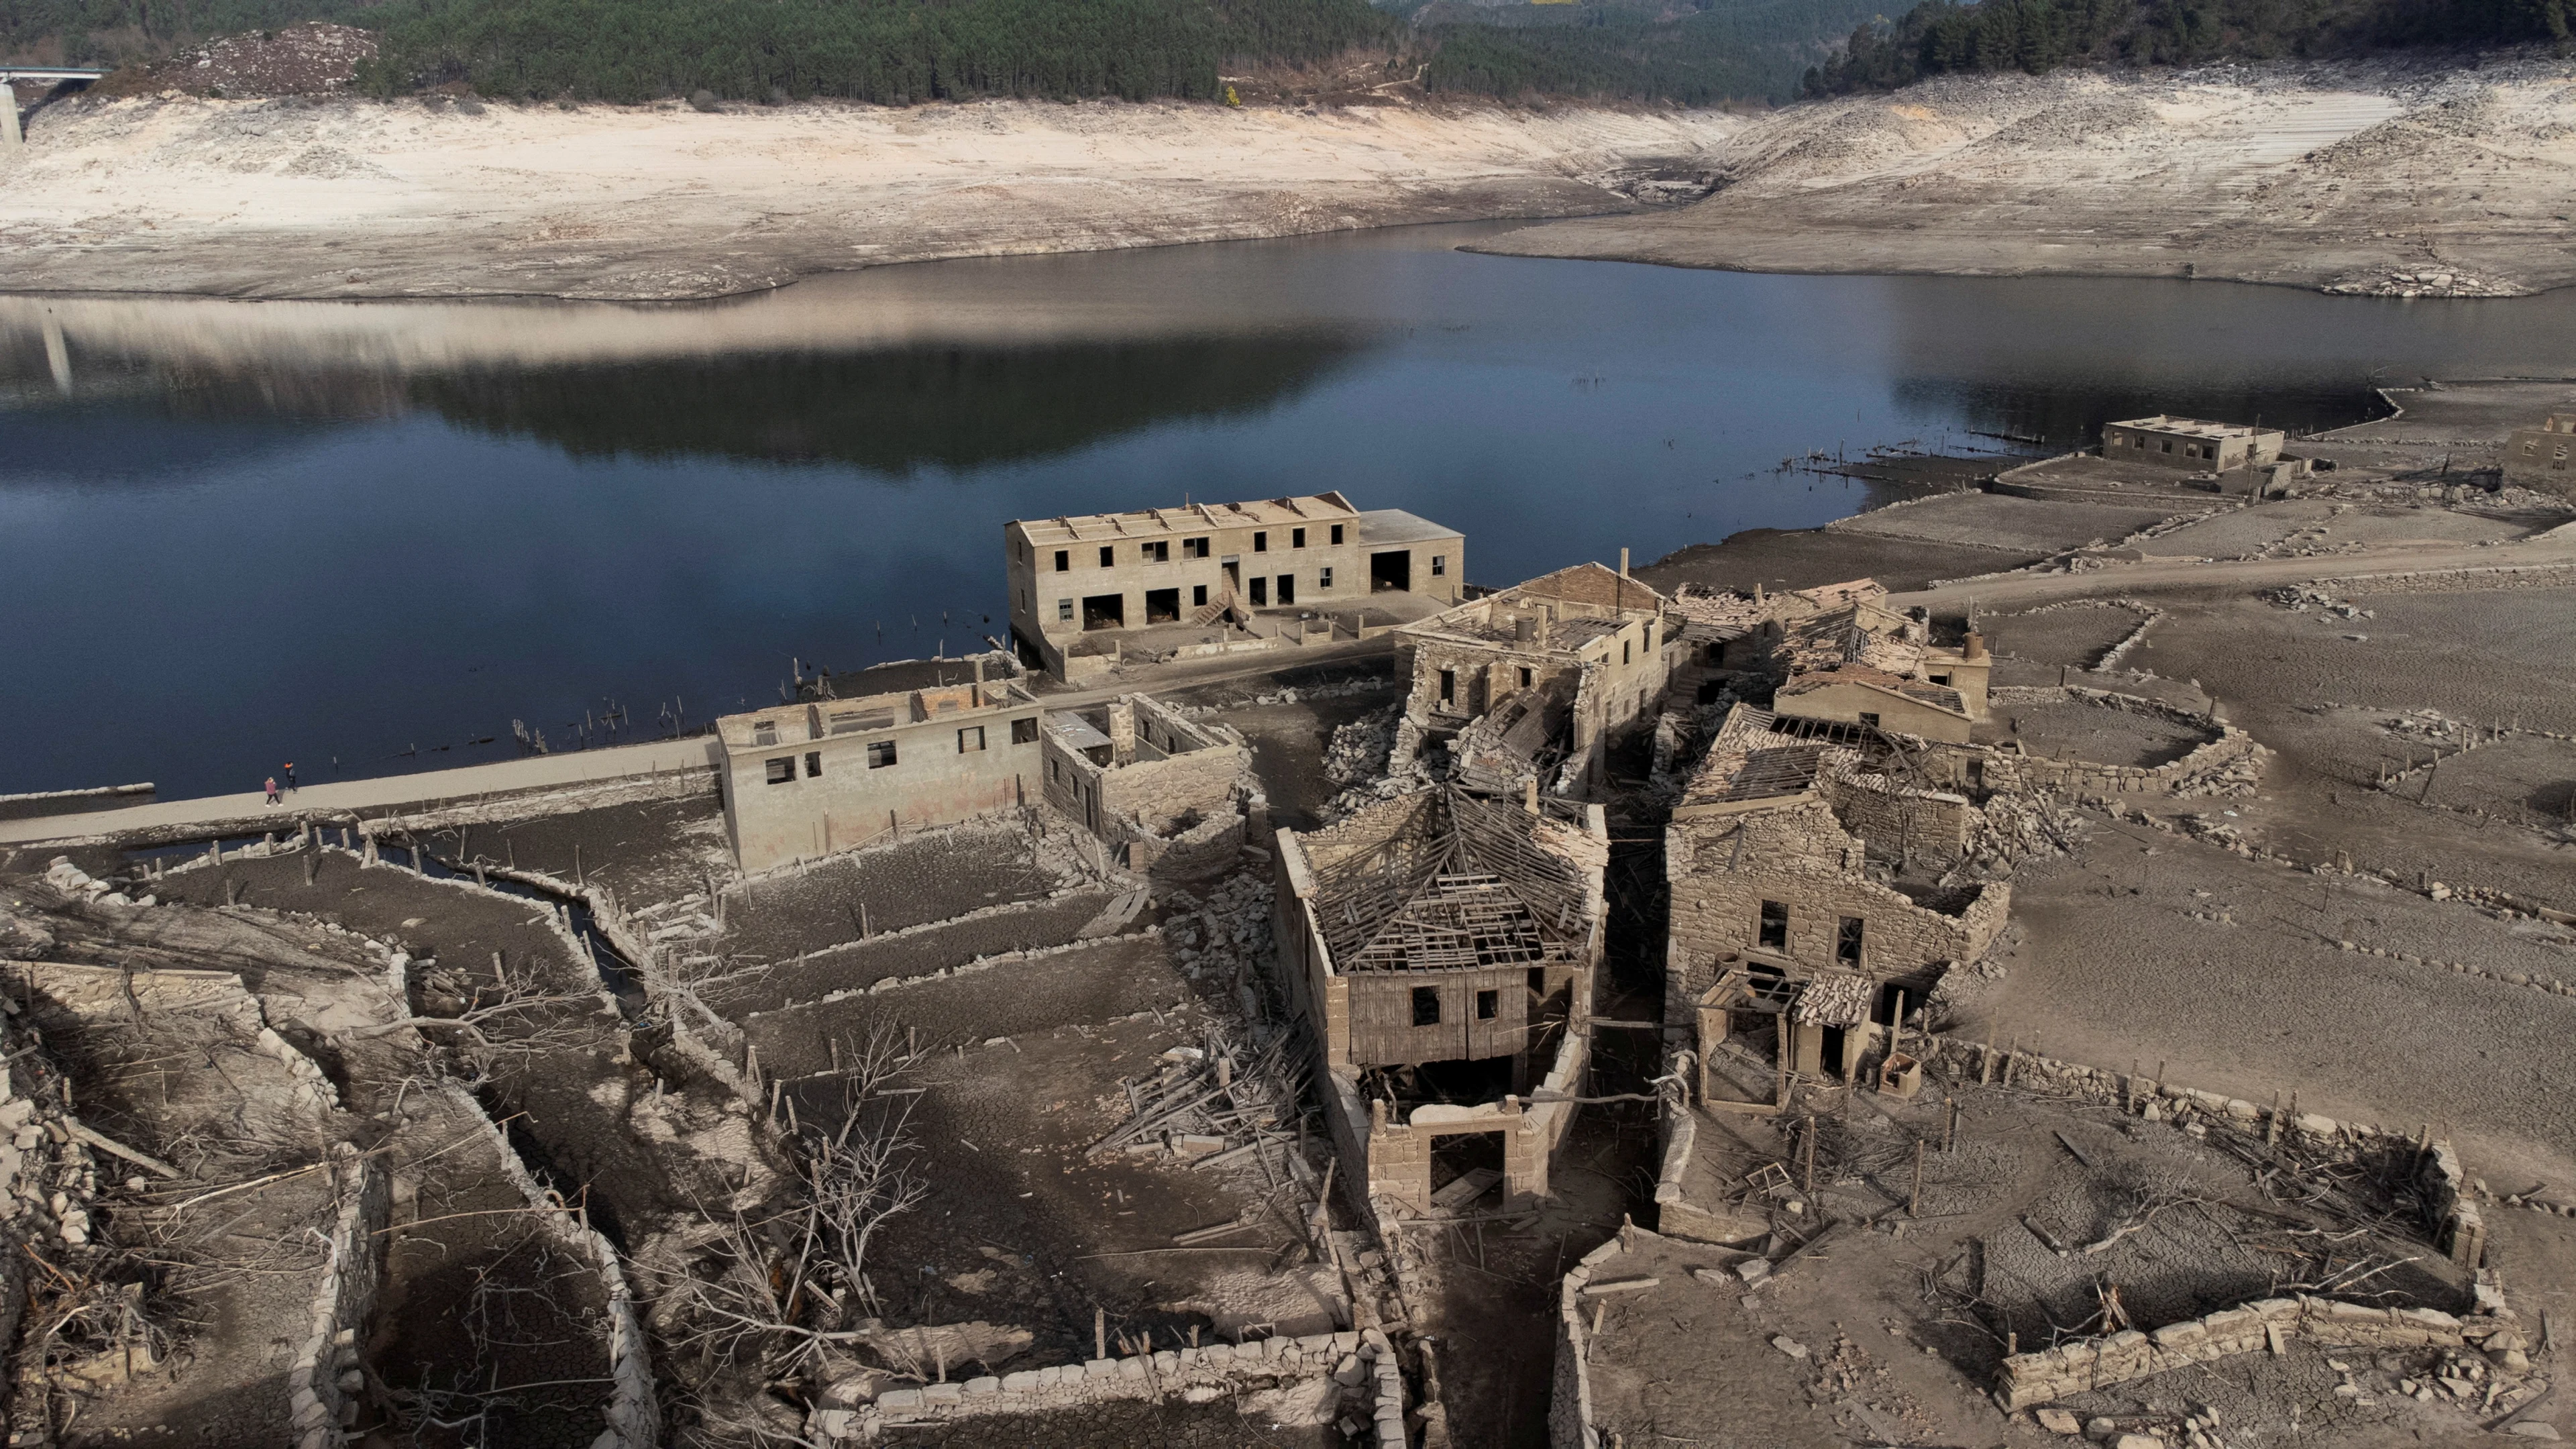 REUTERS: A general view shows the ancient village of Aceredo that had been submerged by Limia river in the 1990s after the dam was built in Concello de Lobios, Spain, February 10, 2022. Picture taken with a drone. REUTERS/Miguel Vidal